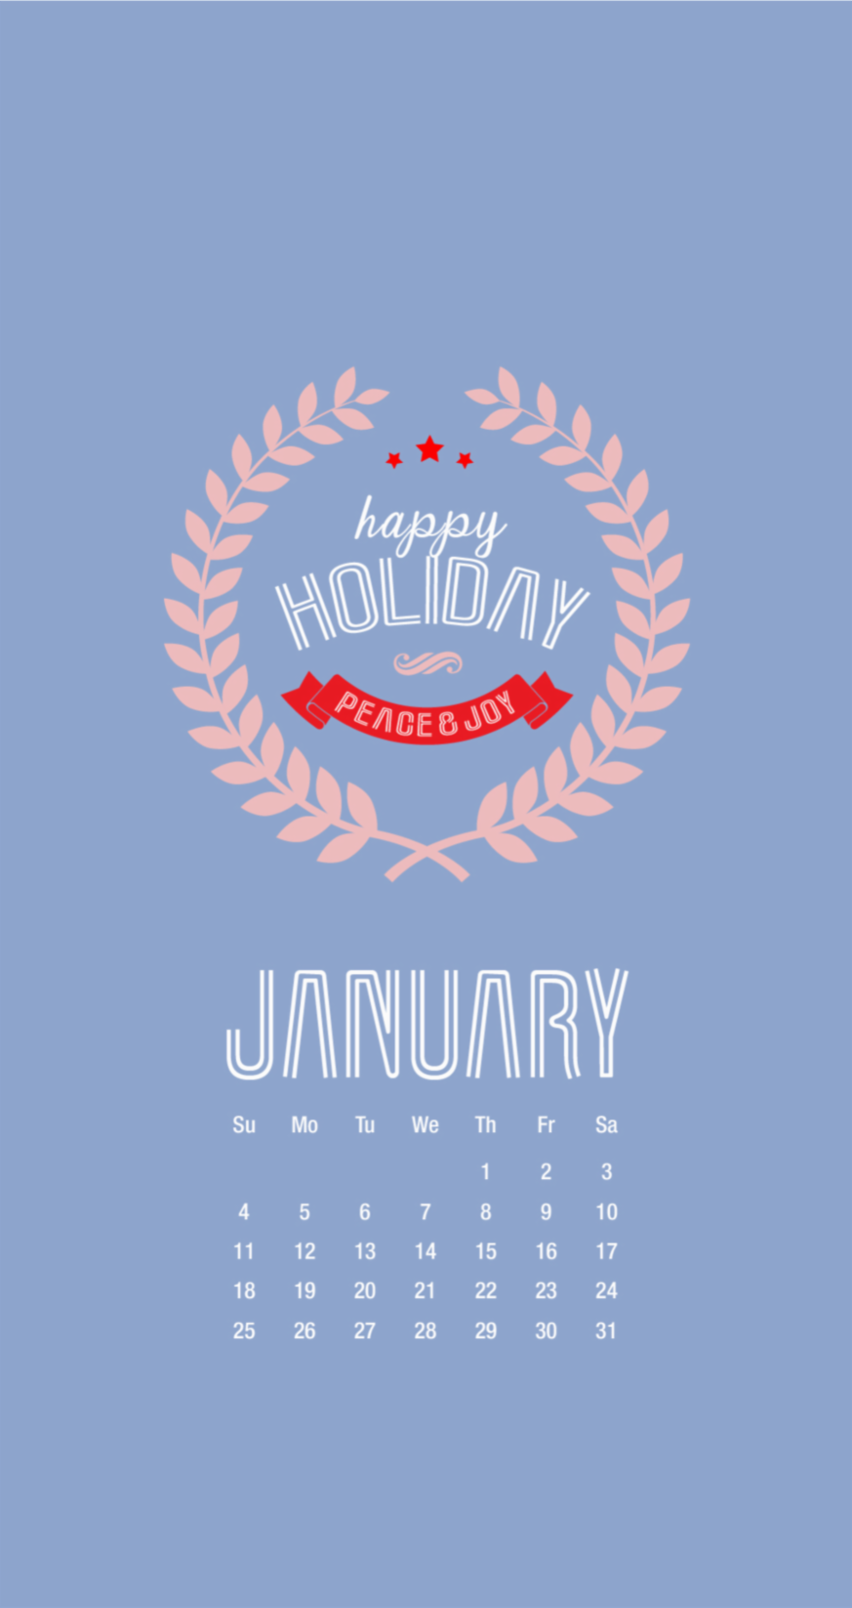 Tap Image For More New Year iPhone Calendar Wallpaper